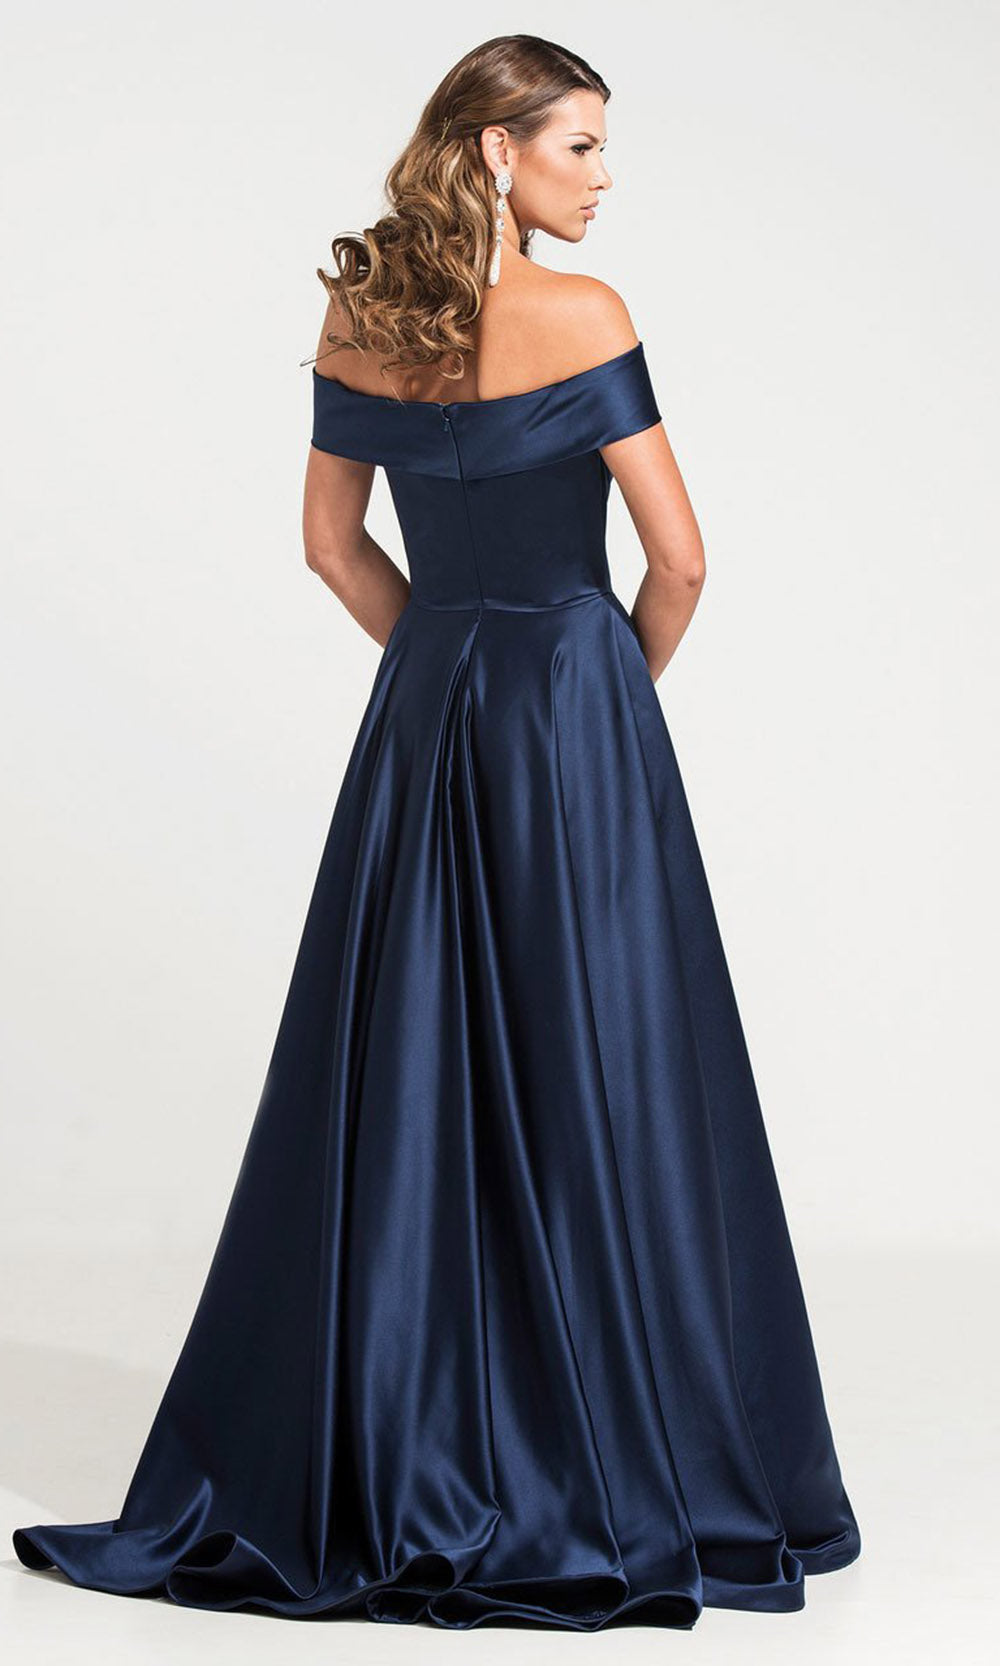 Ashley Lauren - Off Shoulder Pageant Ball Gown 1139 - 1 pc Navy In Size 4 Available CCSALE 4 / Navy